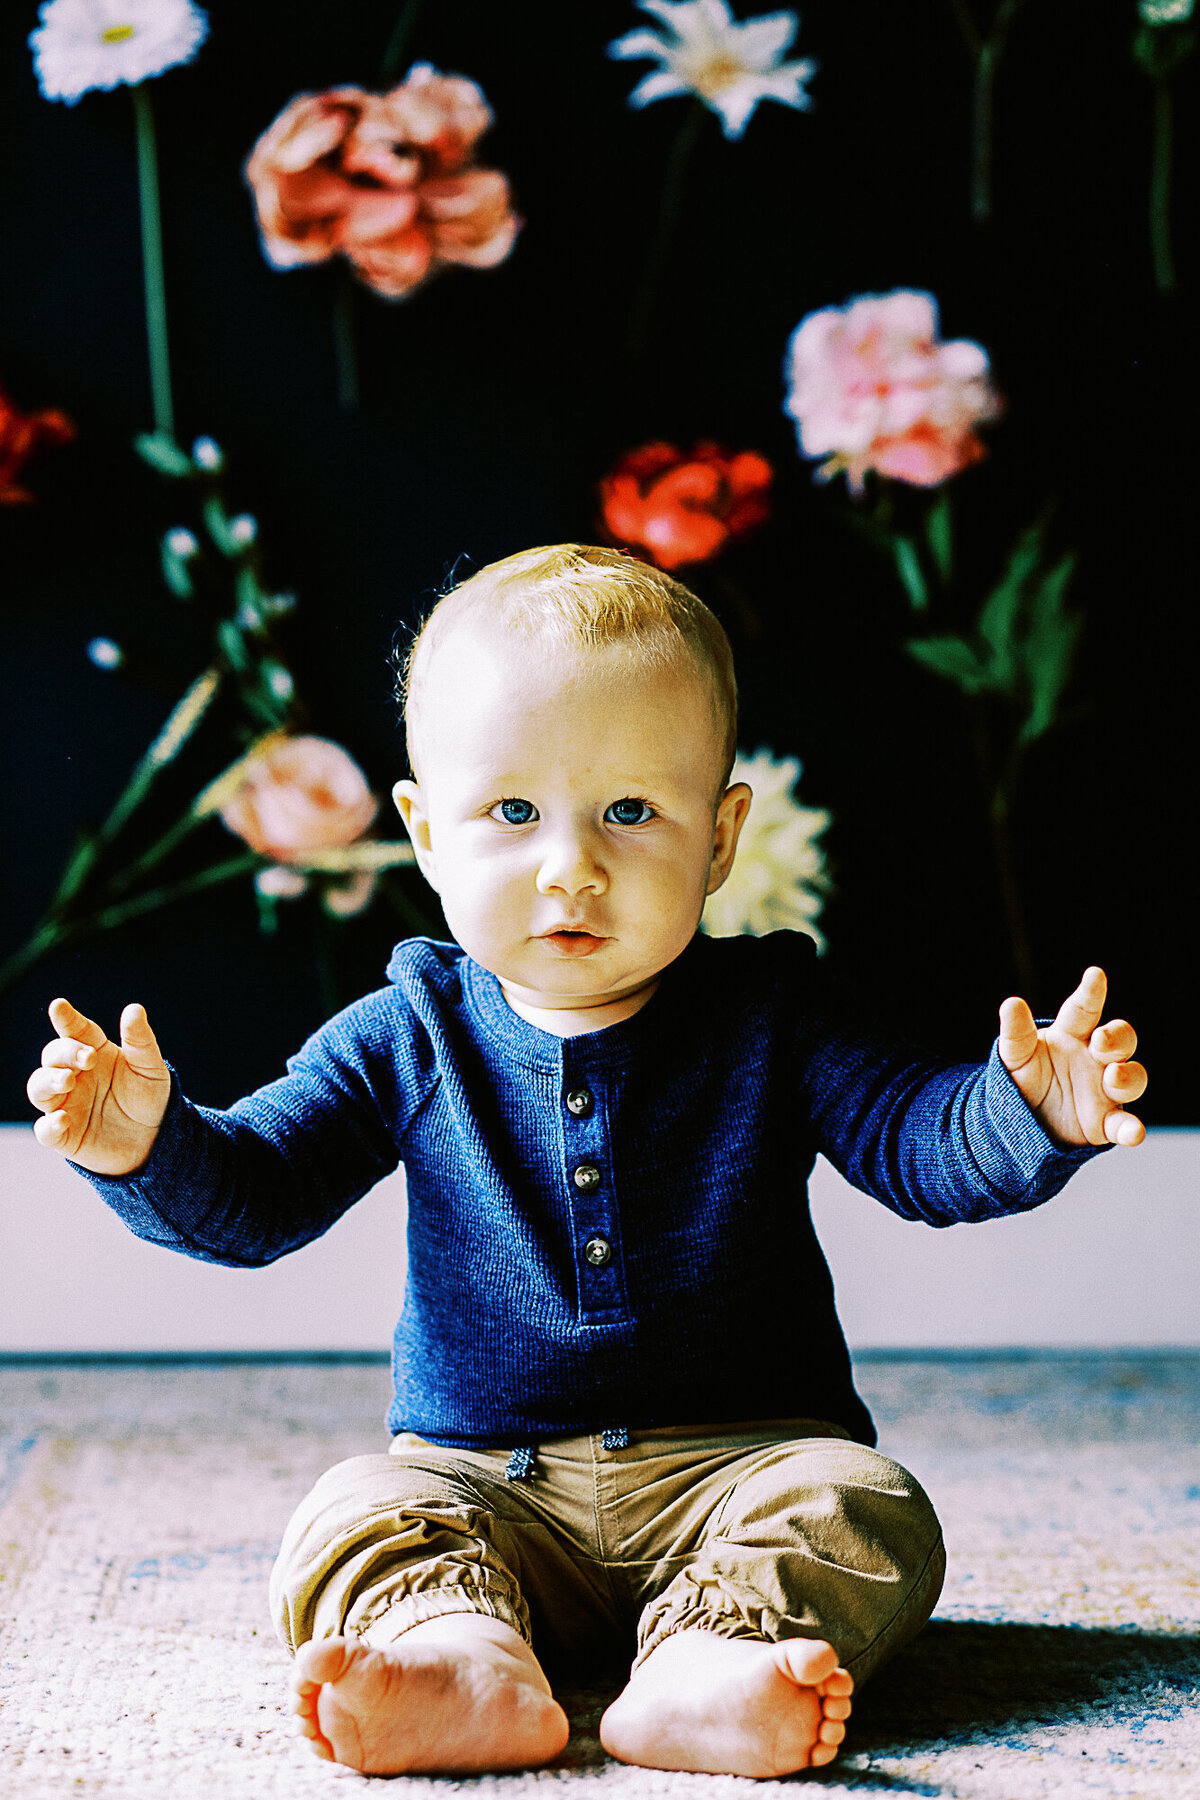 baby boy with blue eyes and blue shirt looks at camera